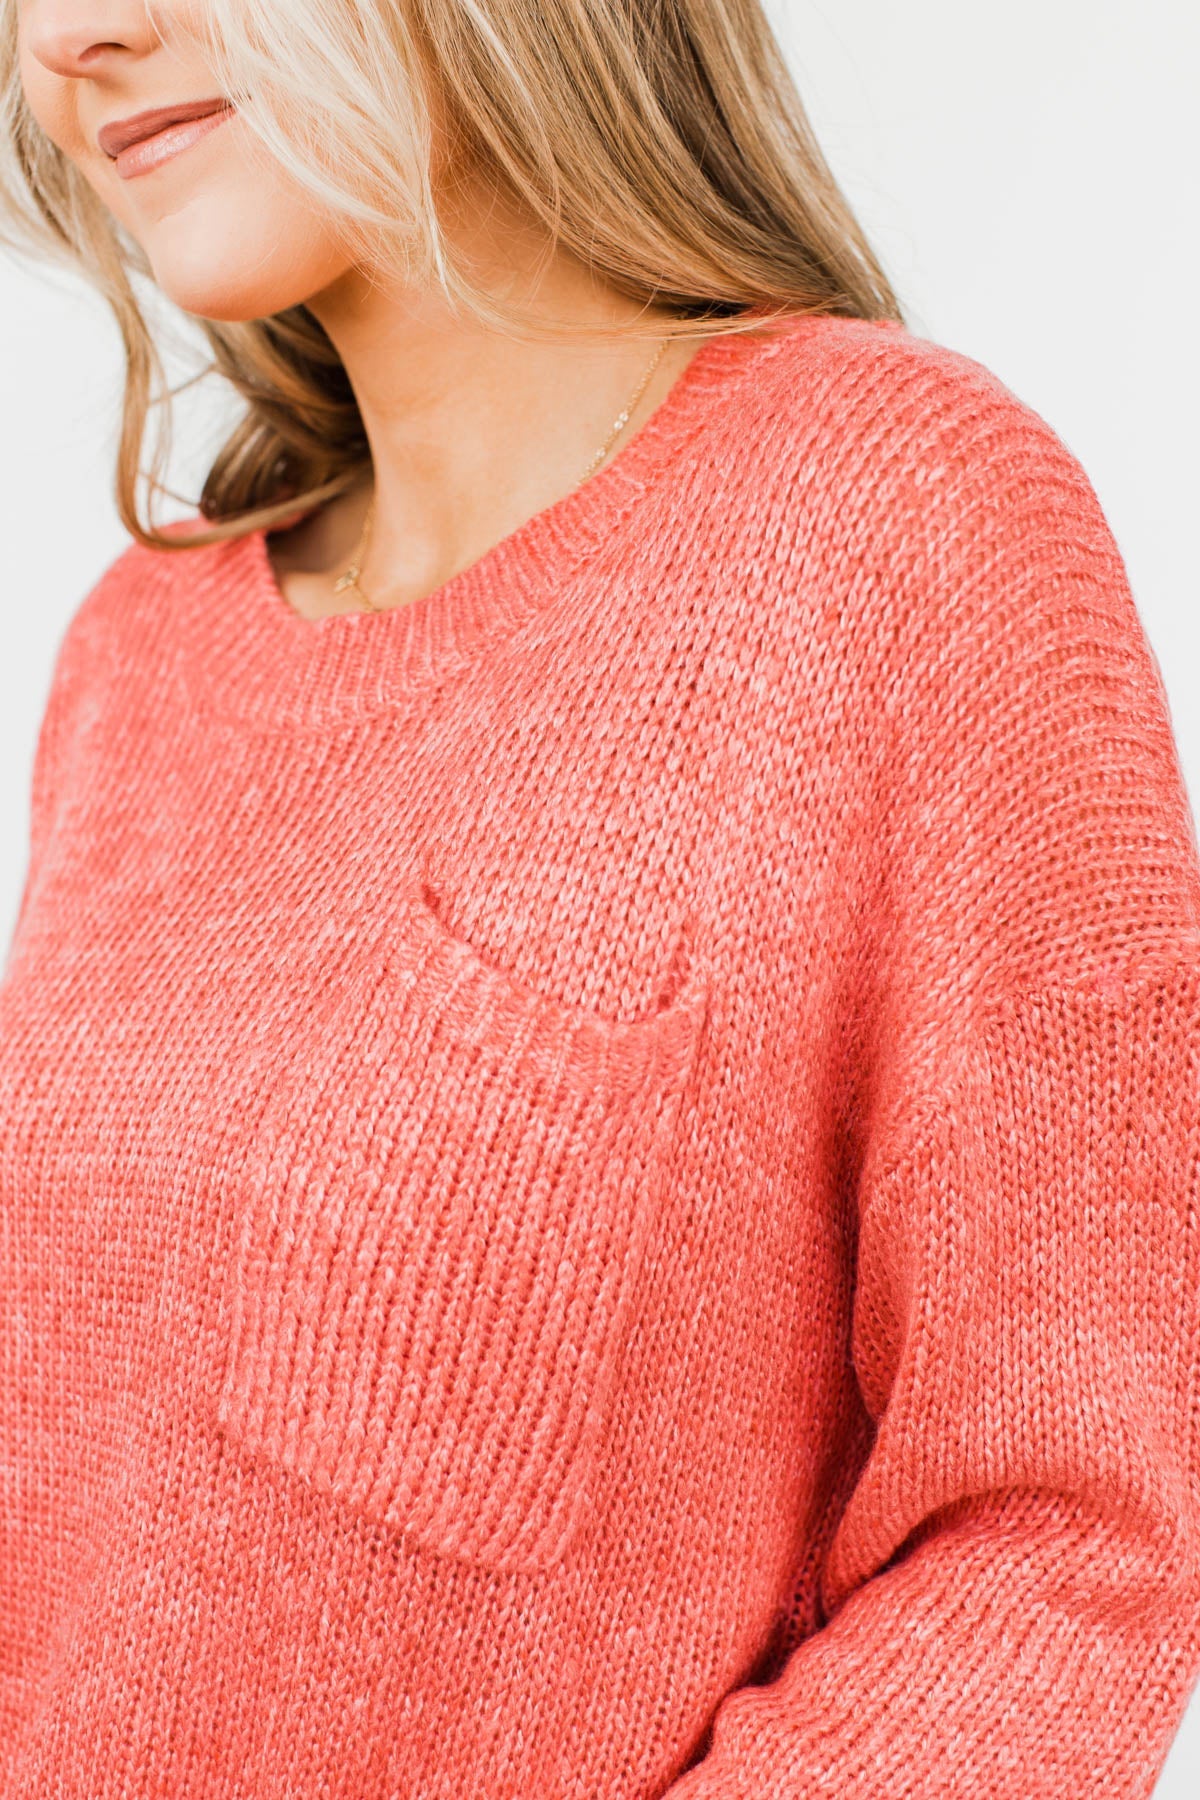 Endlessly Cozy Knit Pocket Sweater- Coral